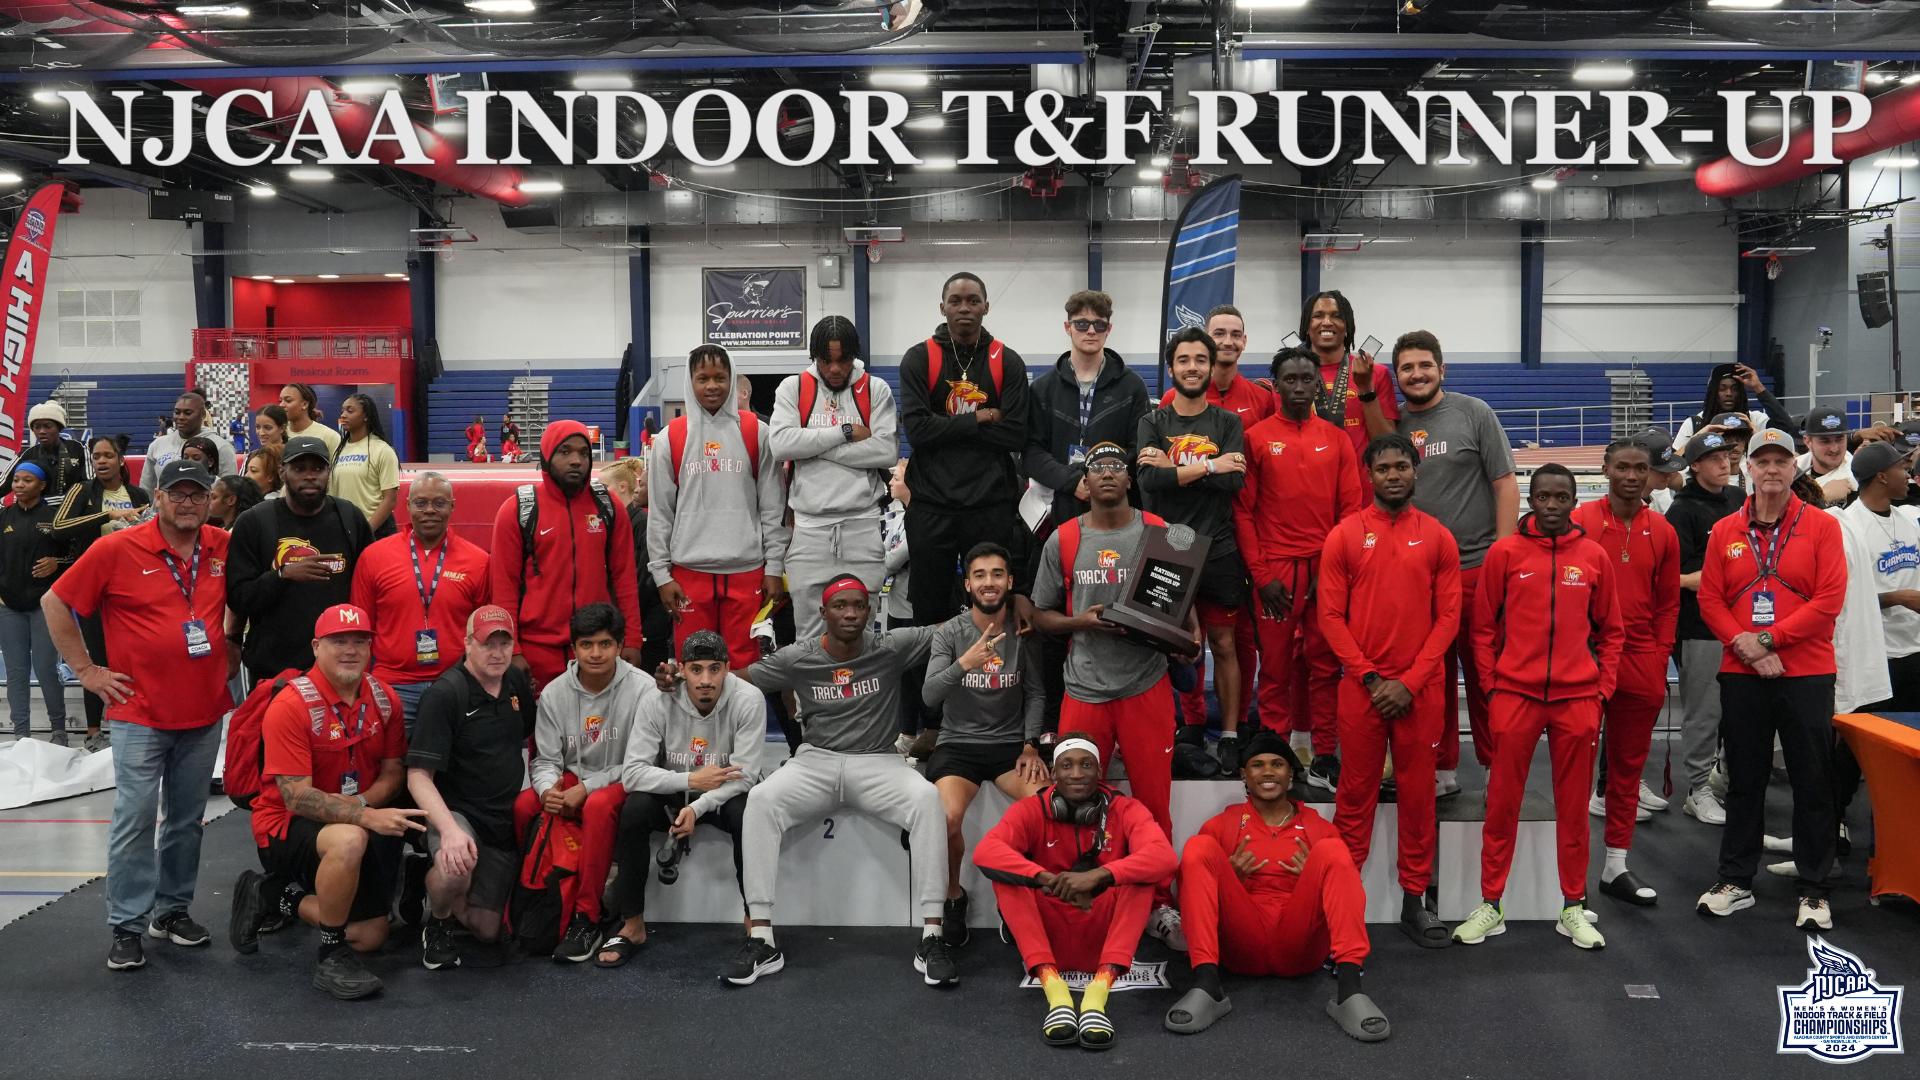 Makarawu and Chiyangwa Repeat, NMJC Finishes Runner-Up at Indoor Nationals